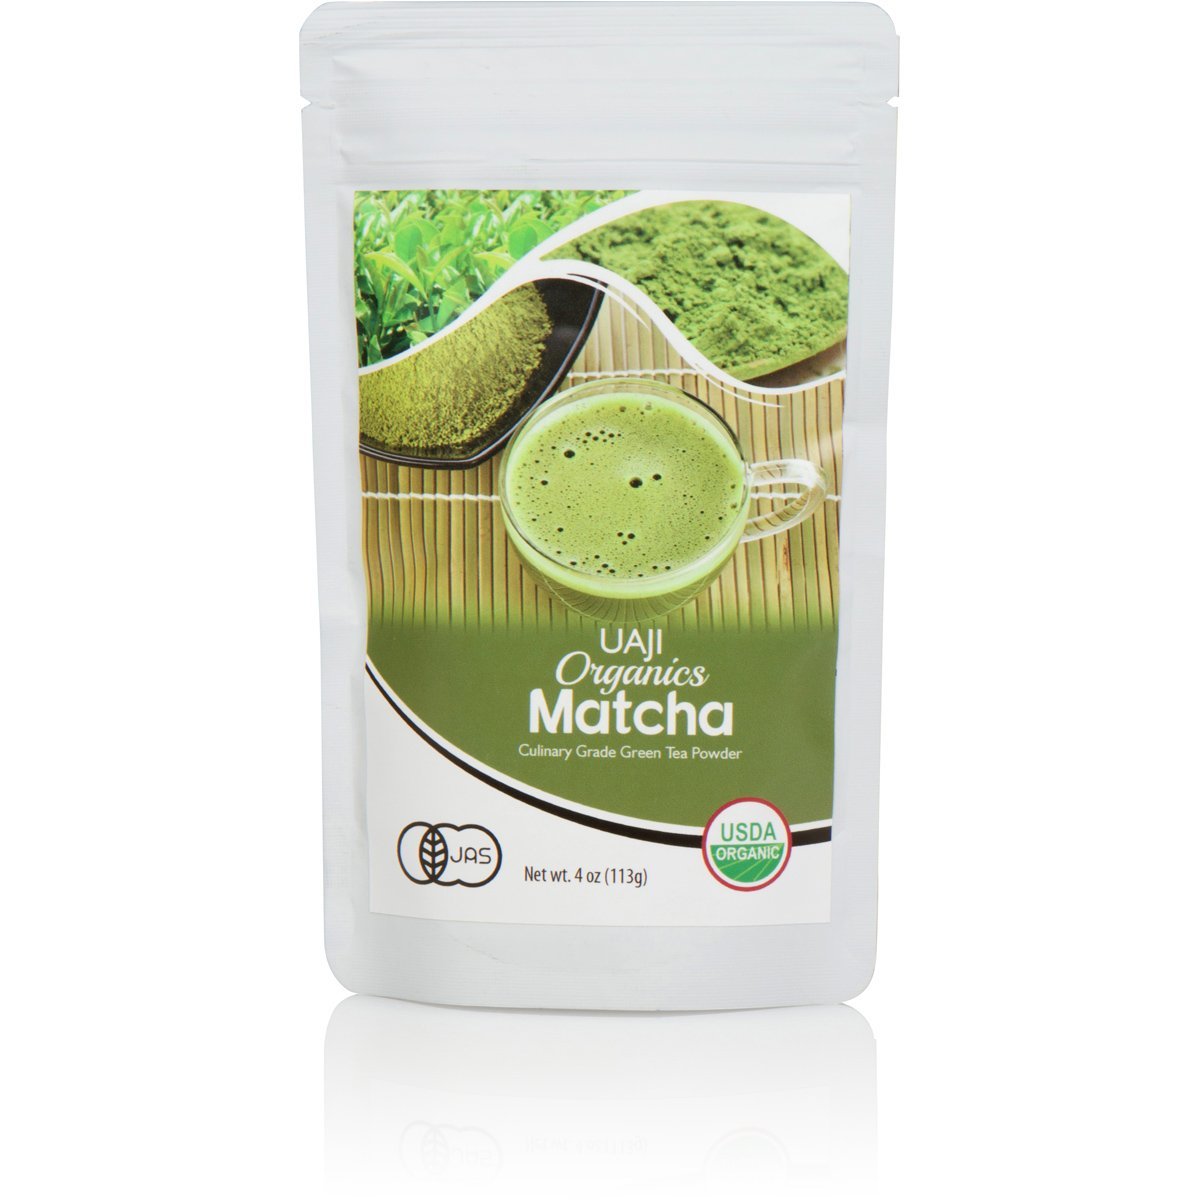 Certified Organic Green Tea Matcha Powder From Japan | Authentic Superfood for Weight Loss & Fat Burning